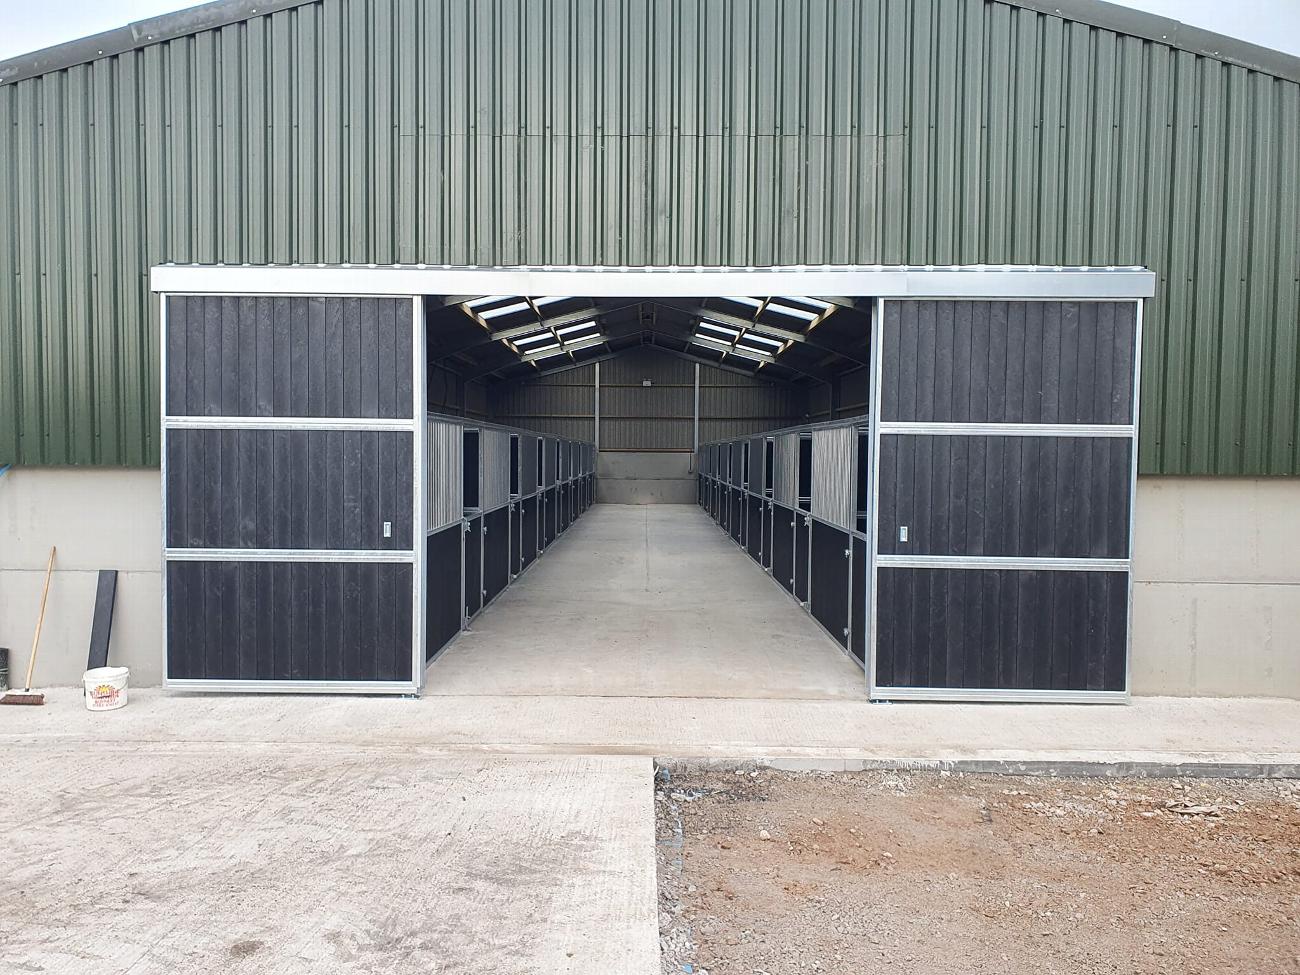 Windows and Doors | equestrian stables, field shelters, equine accessories, arena and menage company in Blackburn and Lancashire gallery image 9